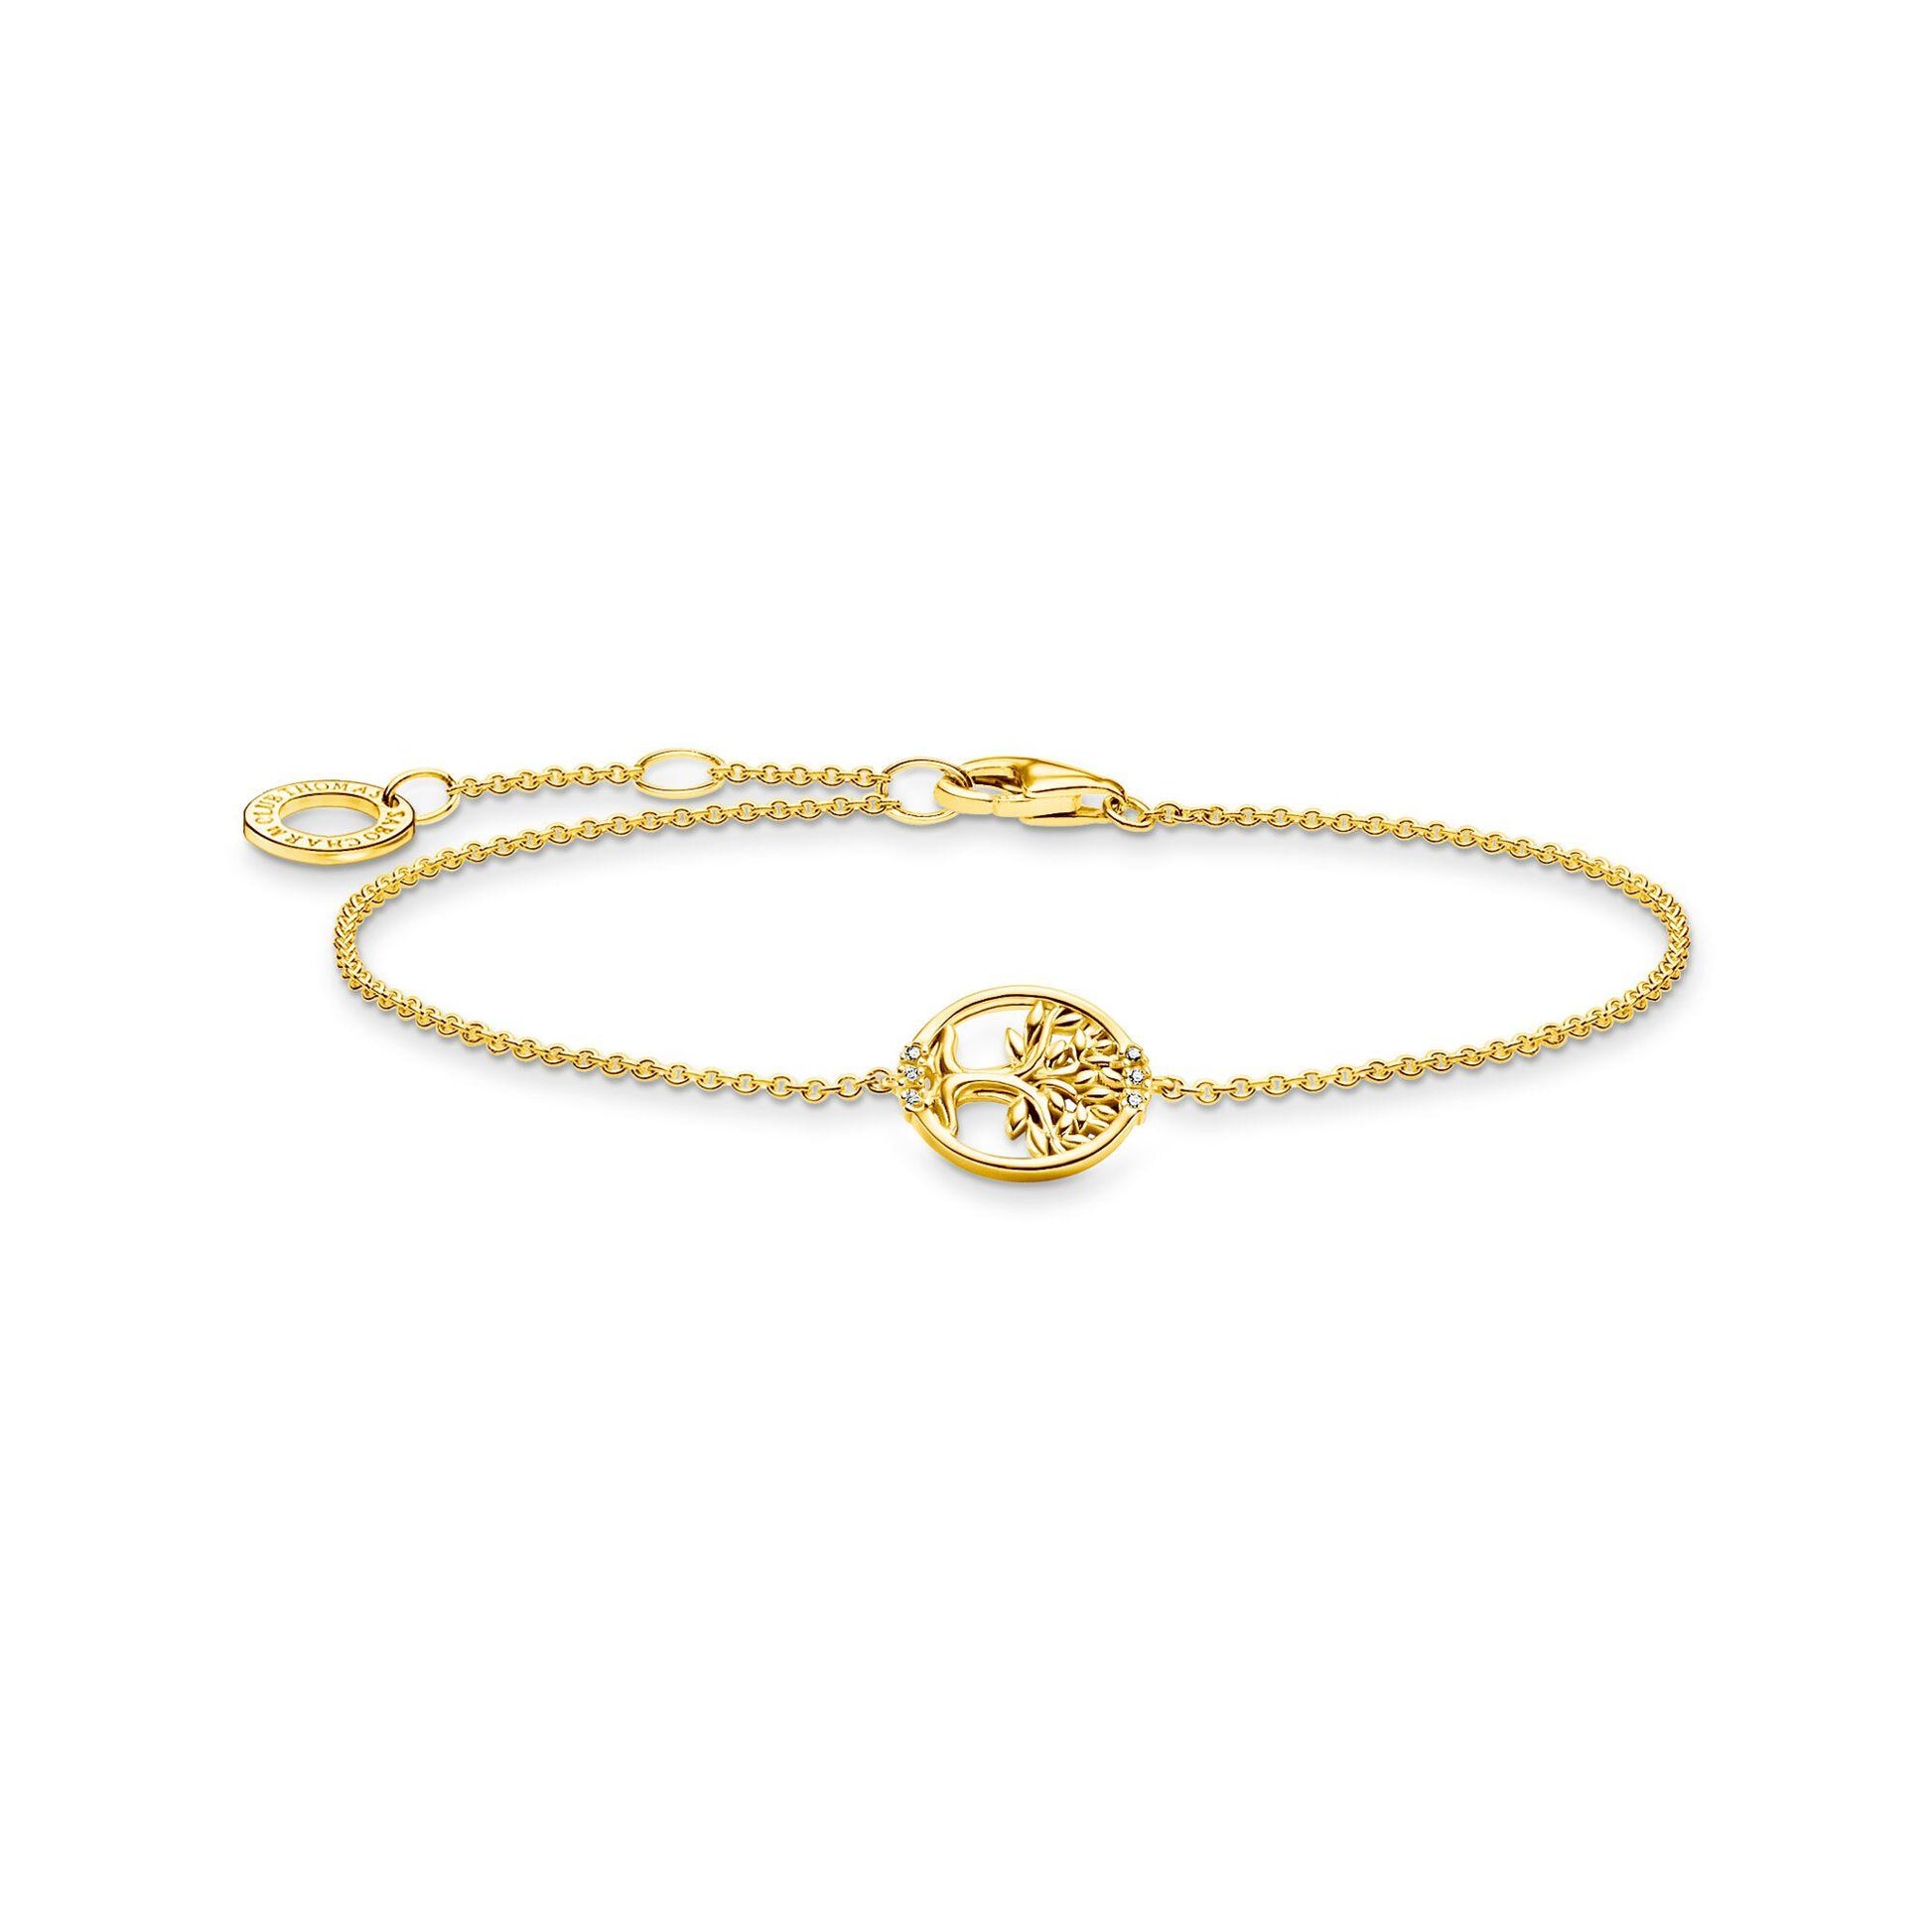 Thomas Sabo Yellow Gold Plated Cubic Zirconia Tree of Life Bracelet A2041-414-14 - Judith Hart Jewellers